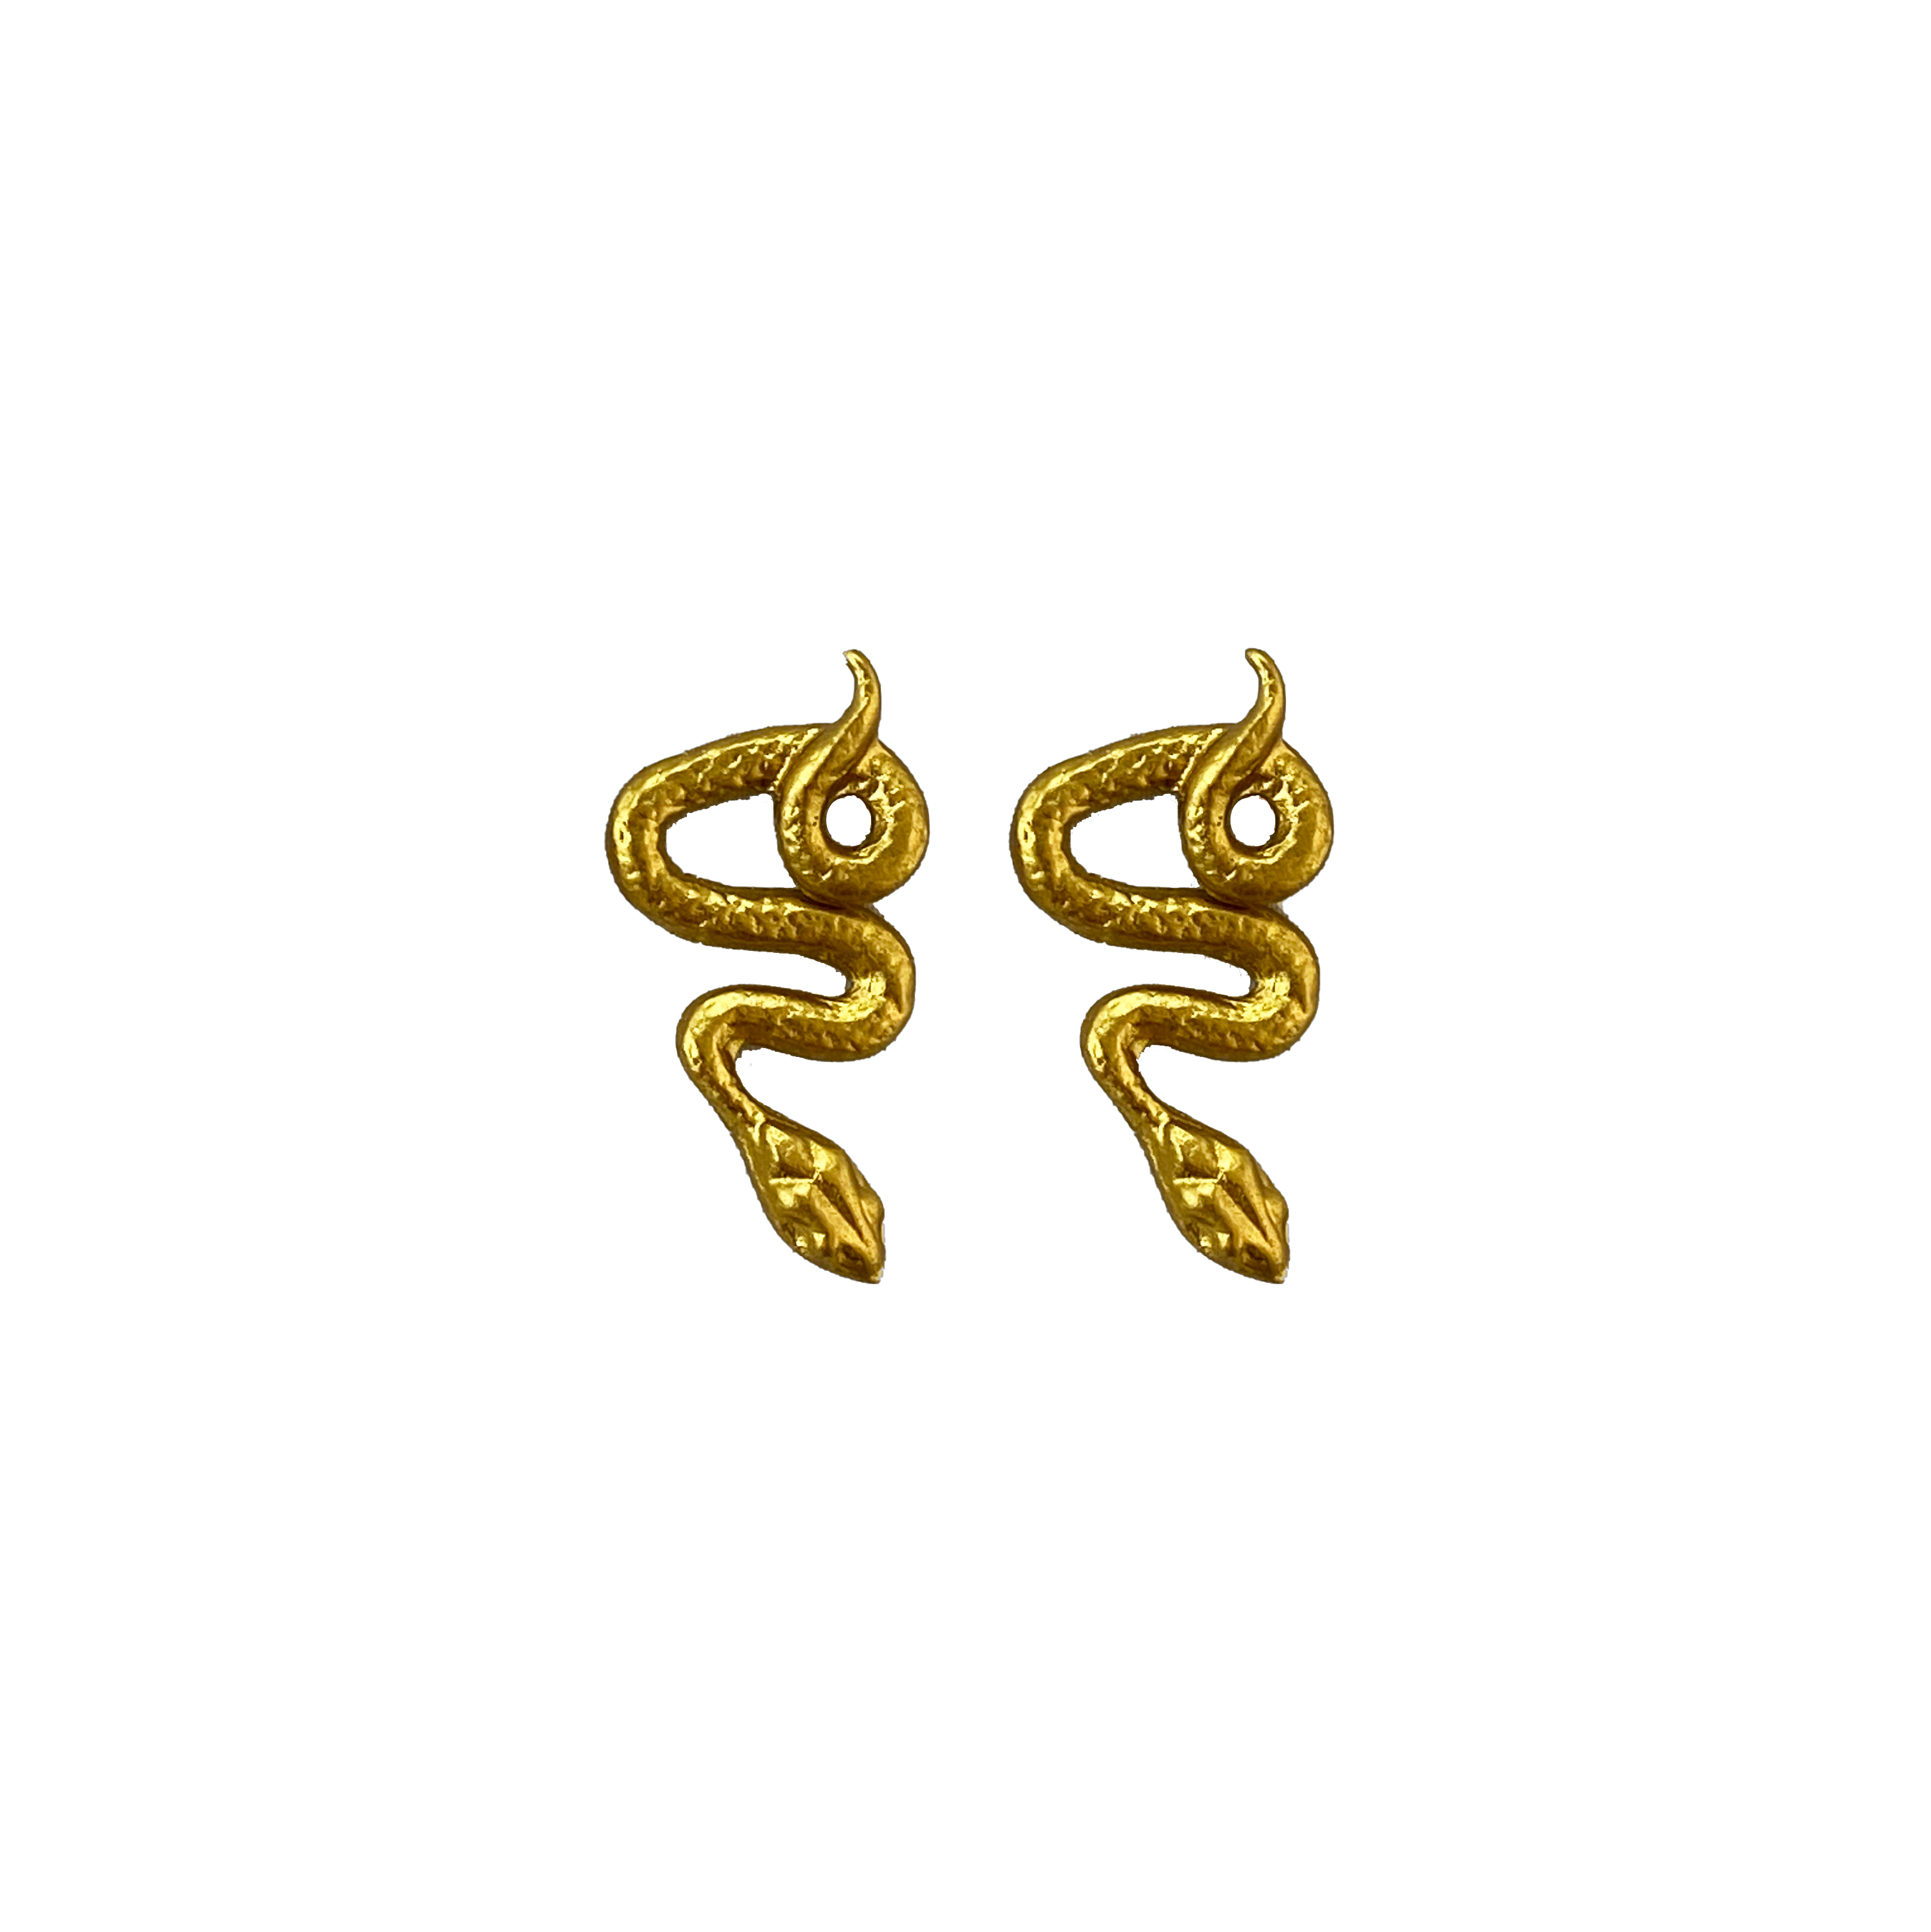 Elevate your style with Gold Tone Snake Earrings by Beatrix Ost. Symbolizing transformation, these statement pieces support Laotian artisans and MAG's de-mining efforts. Shop now for a unique blend of style, symbolism, and social responsibility.